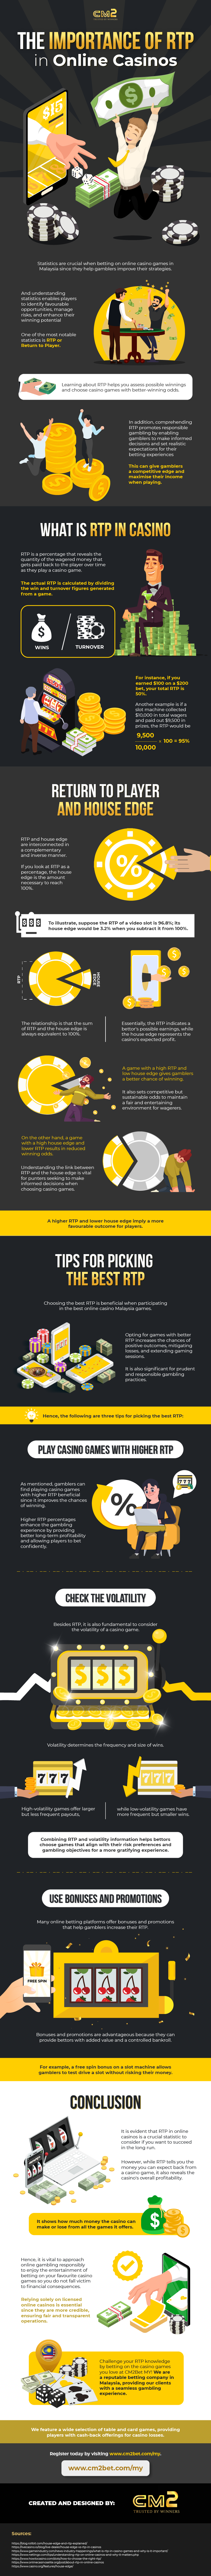 The Importance of RTP in Online Casinos